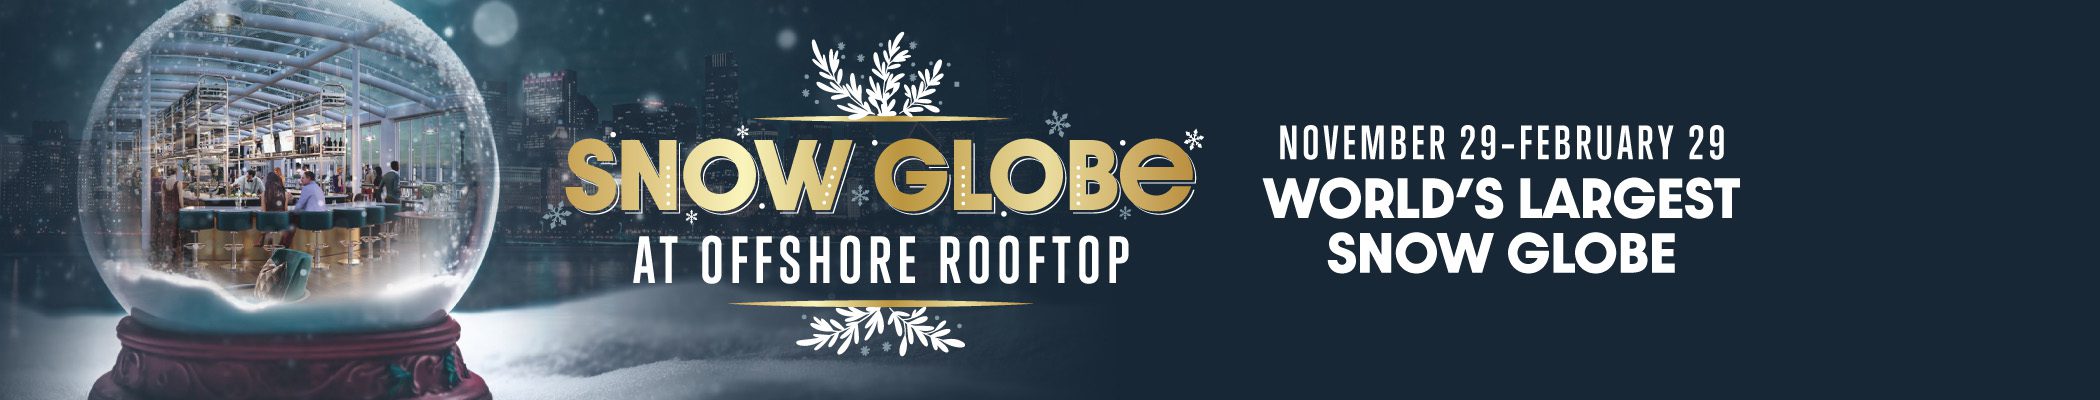 Snowglobe at Offshore Rooftop